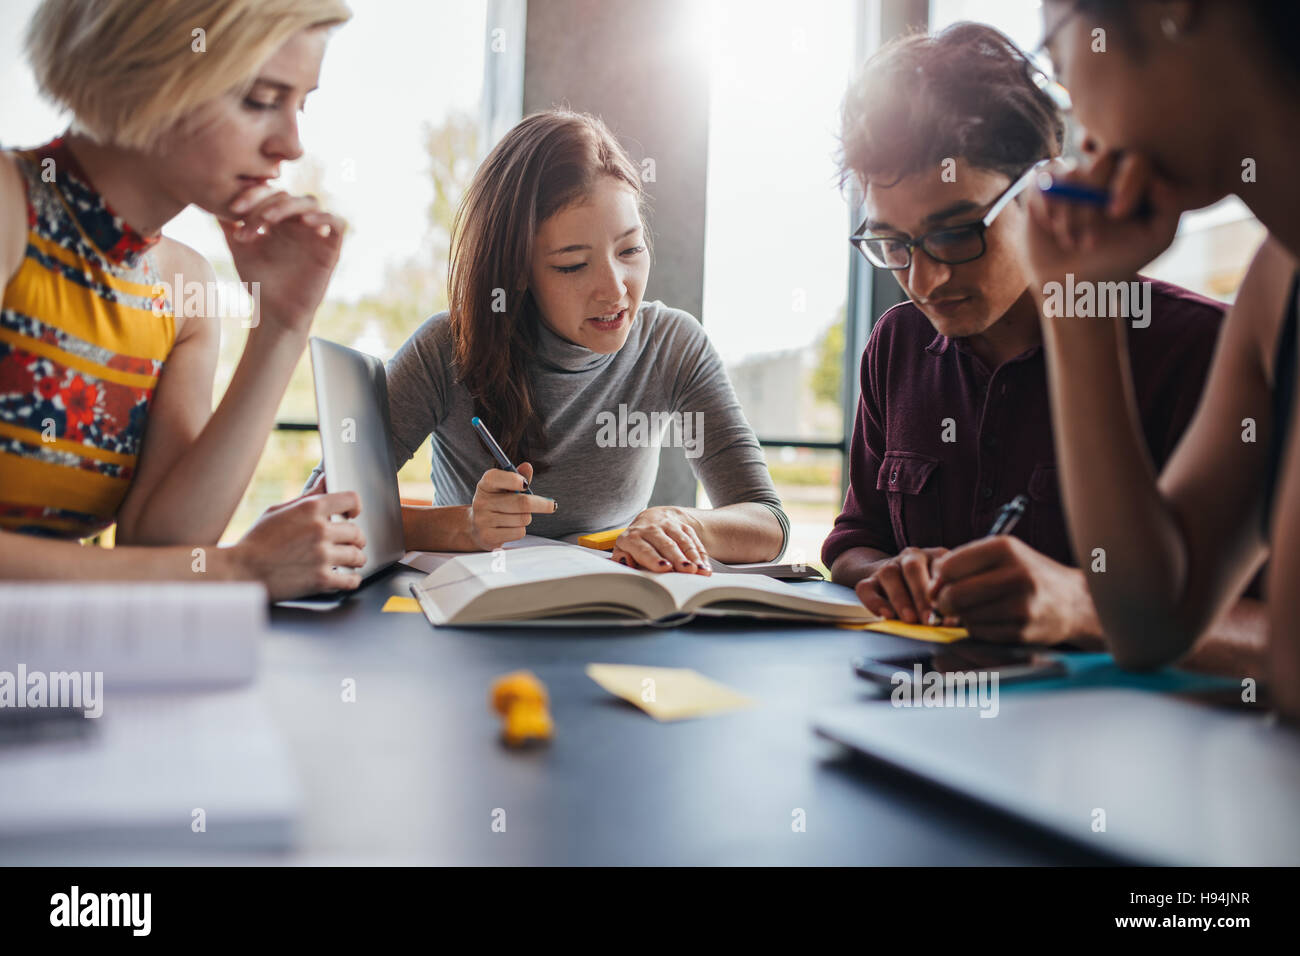 Multiethnic young people sitting at table reading reference books for study notes. Group of young students doing school assignment in library. Stock Photo